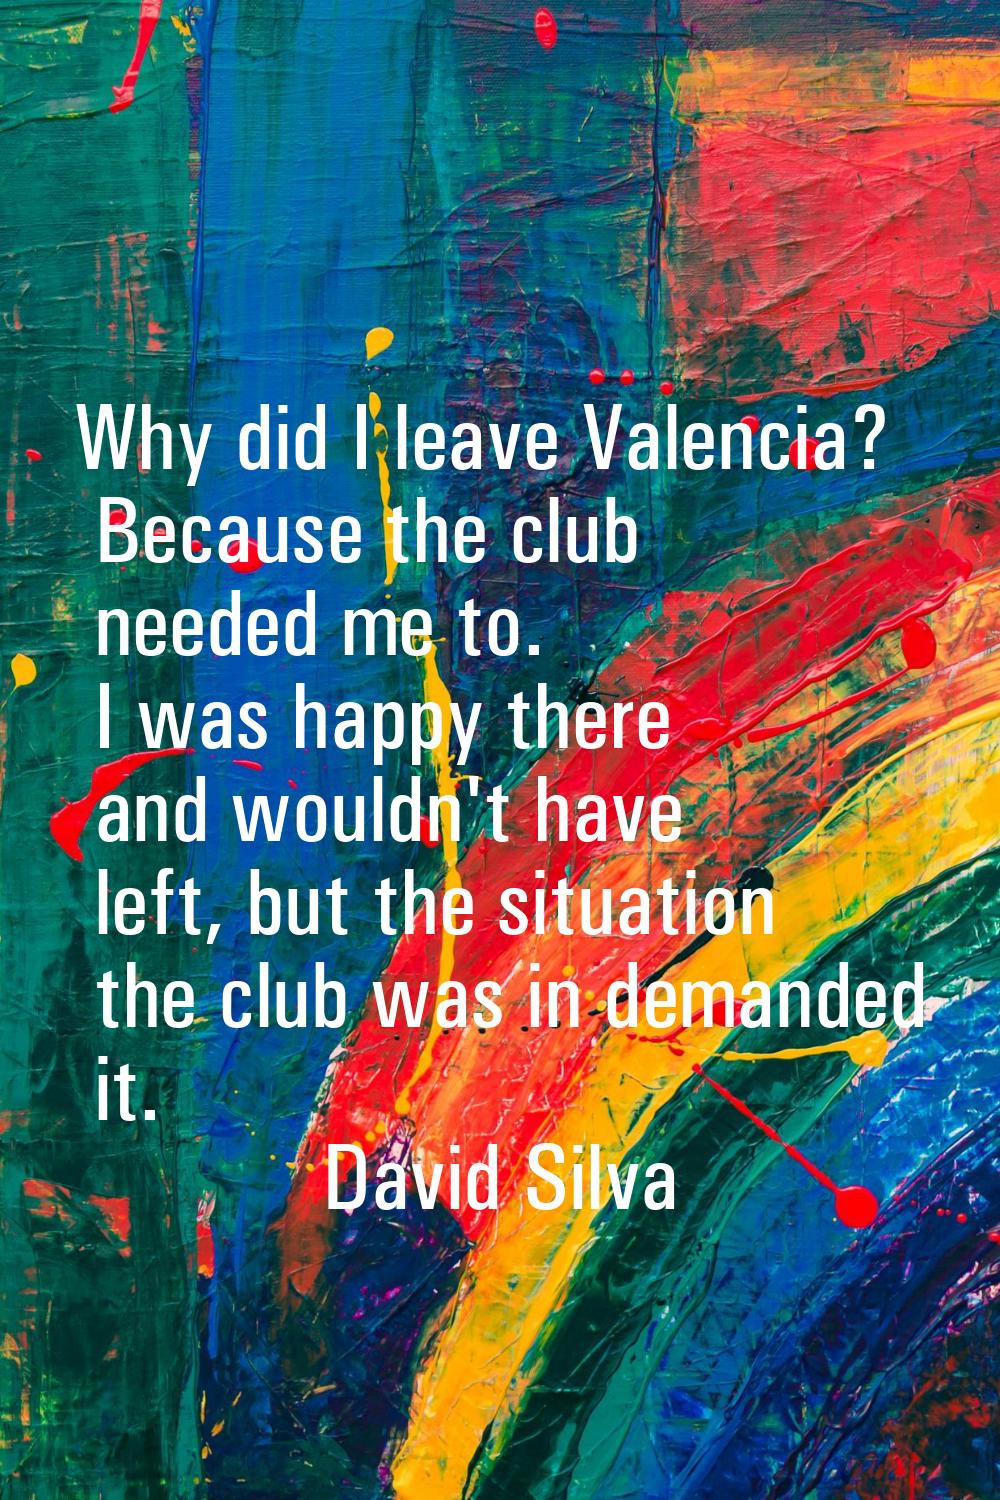 Why did I leave Valencia? Because the club needed me to. I was happy there and wouldn't have left, 